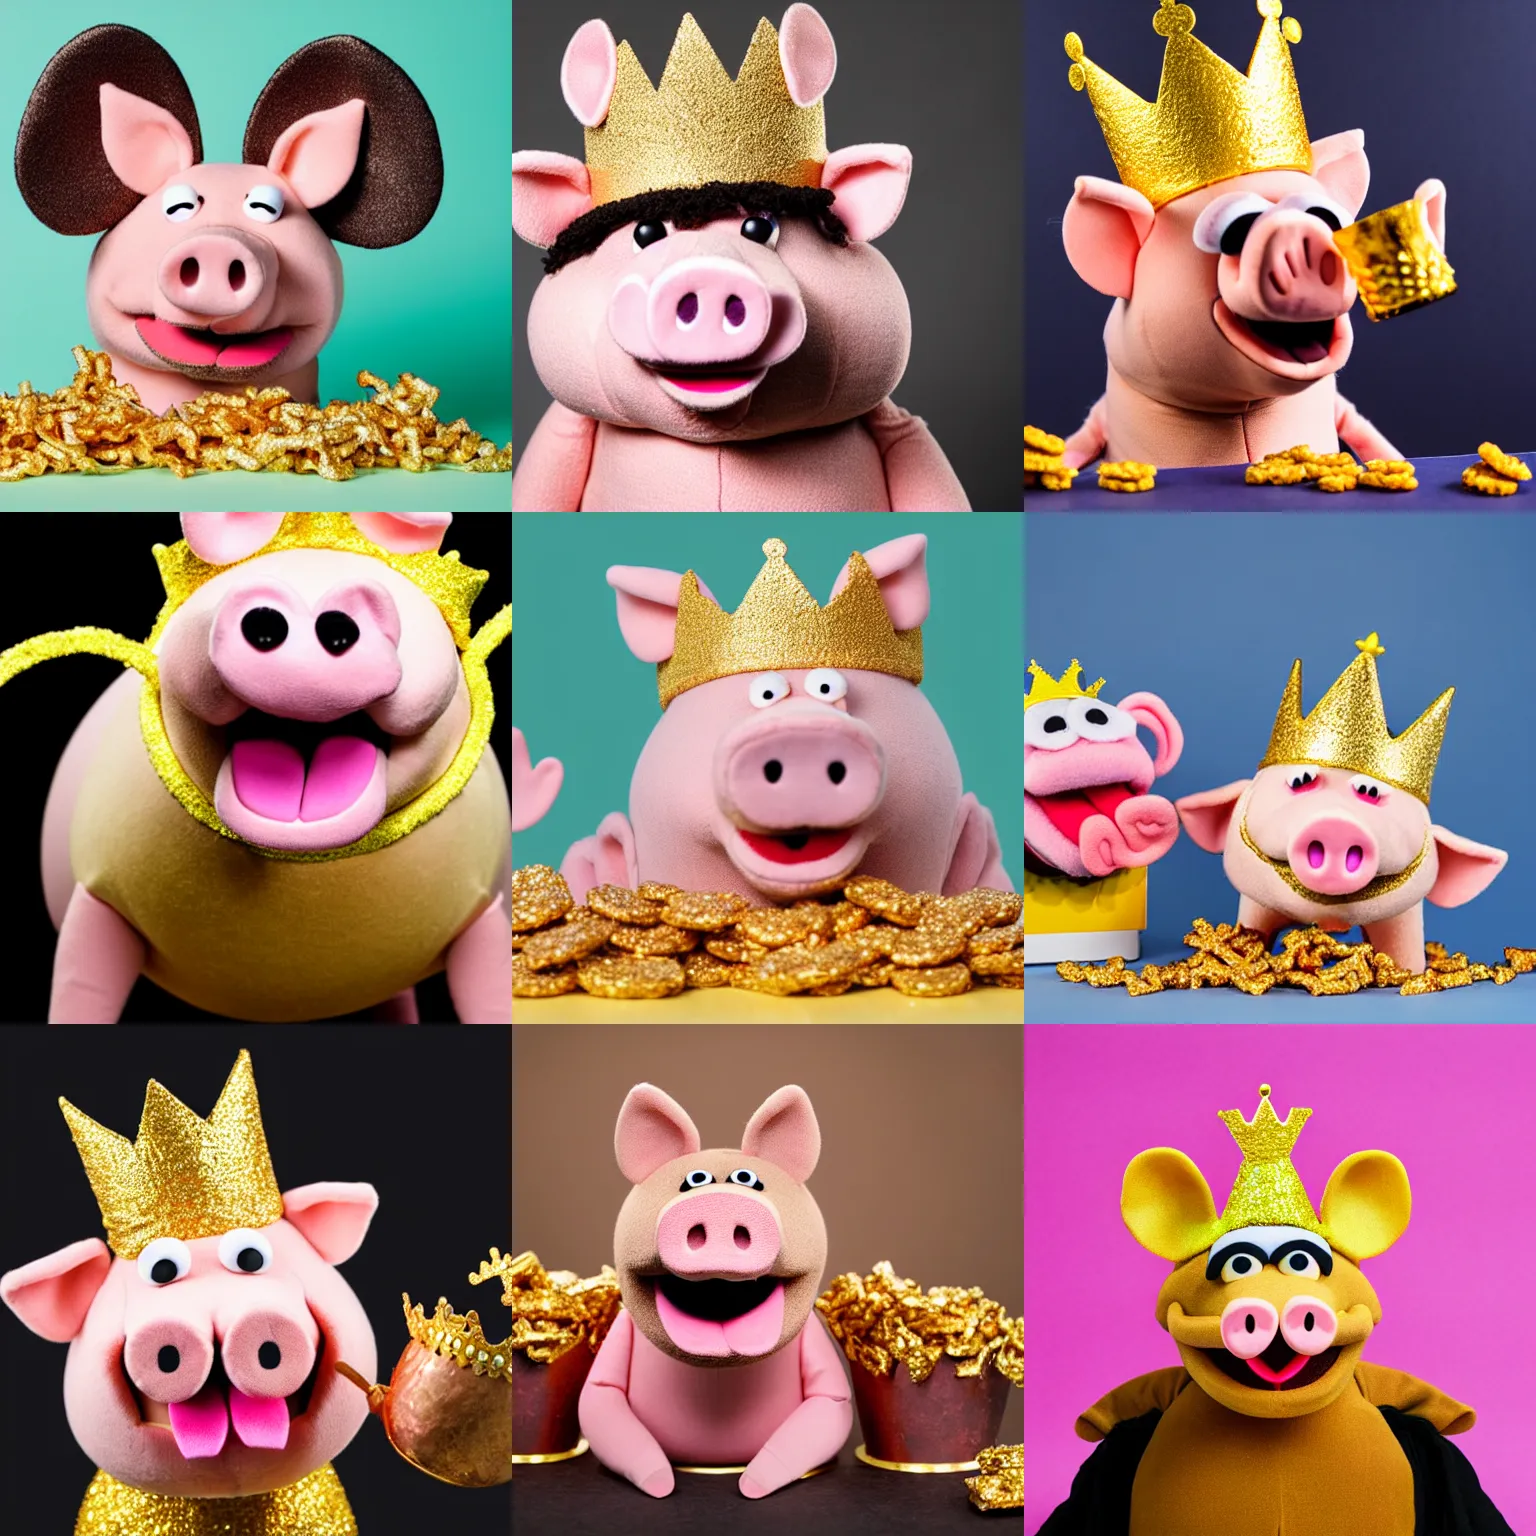 Prompt: studio photograph of a smiling pig depicted as a muppet wearing a gold crown eating snacks